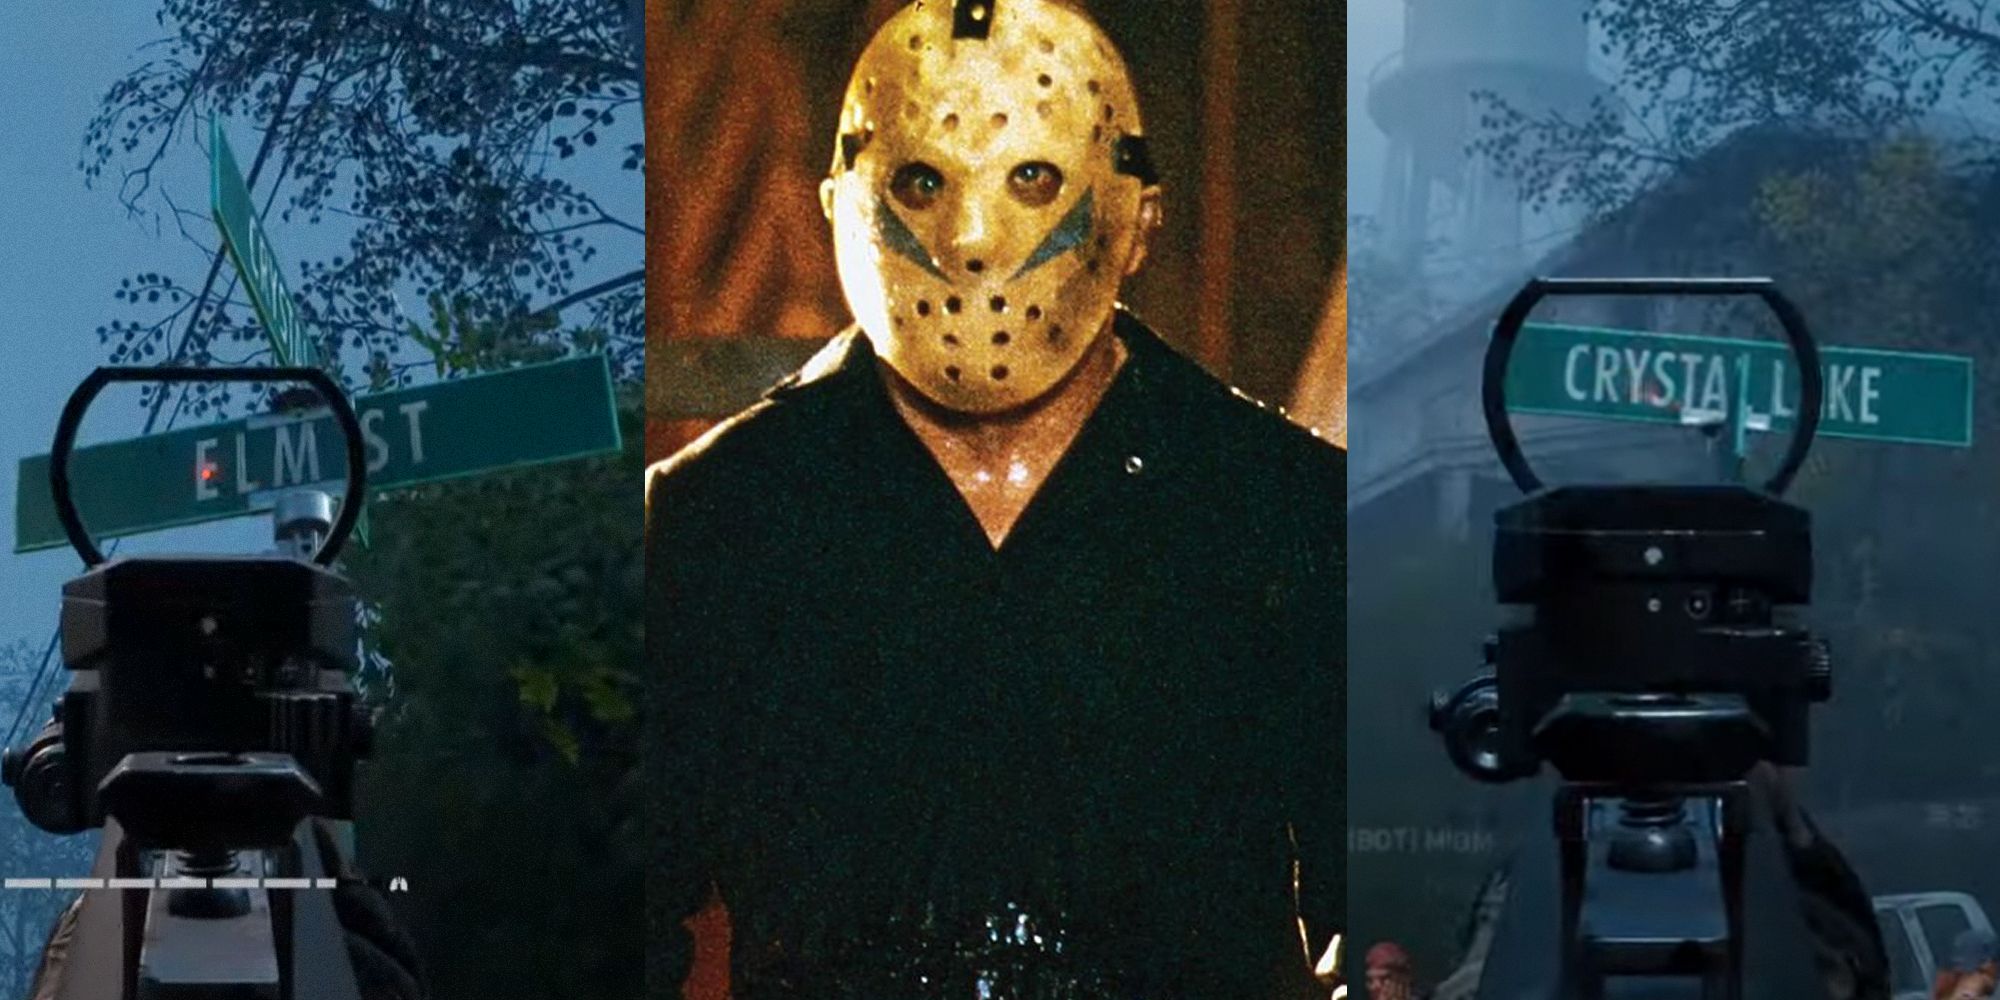 Back 4 Blood, Friday The 13th. Split image three ways. Jason Voorhees is in the middle. Photos of street names on the left and right.